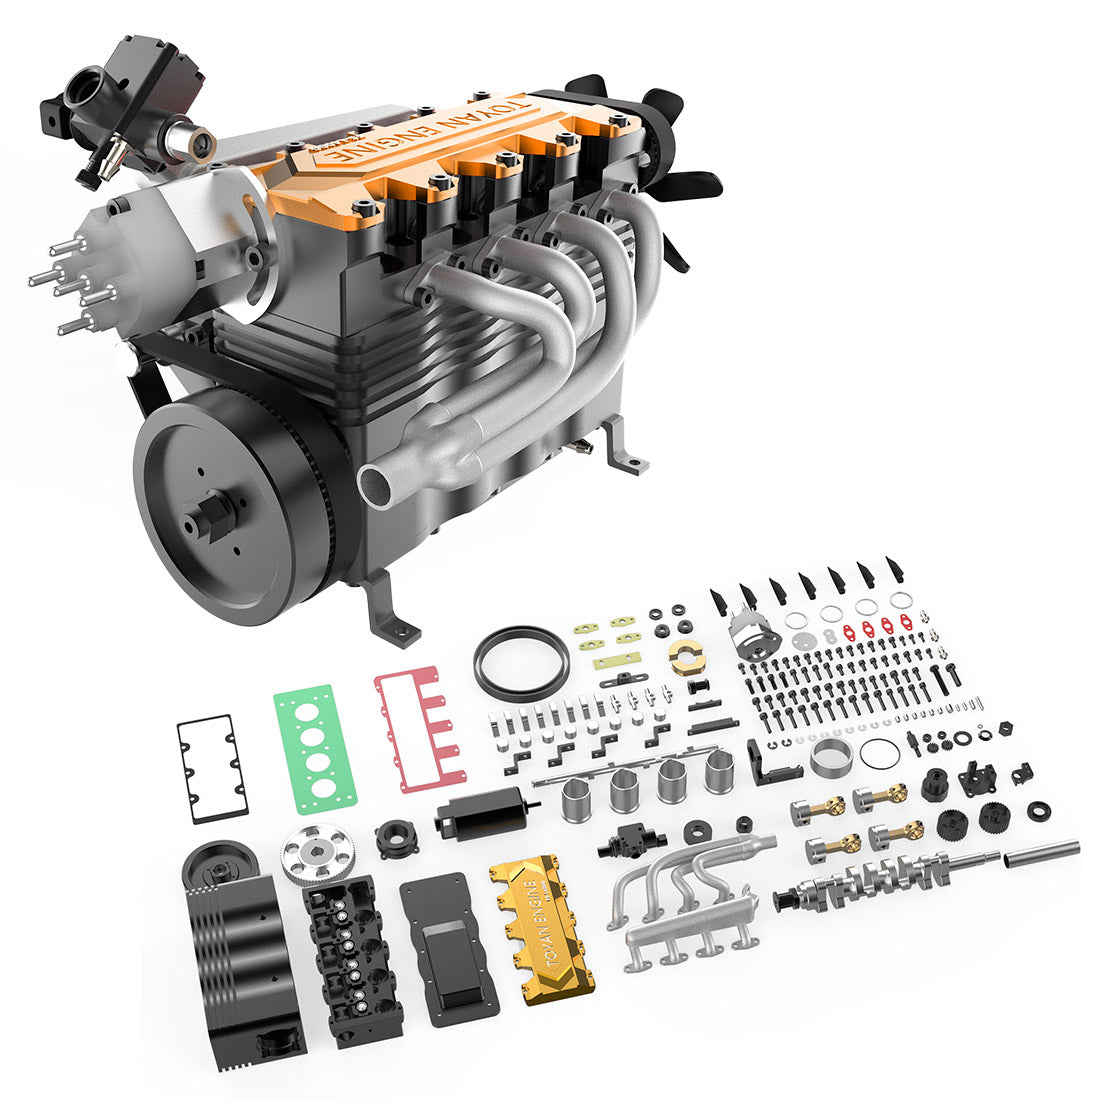 TOYAN FS-L400 14cc Inline 4 Cylinder 4 Stroke Water-cooled Assembly Engine Model For RC Model Car Ship Airplane - stirlingkit